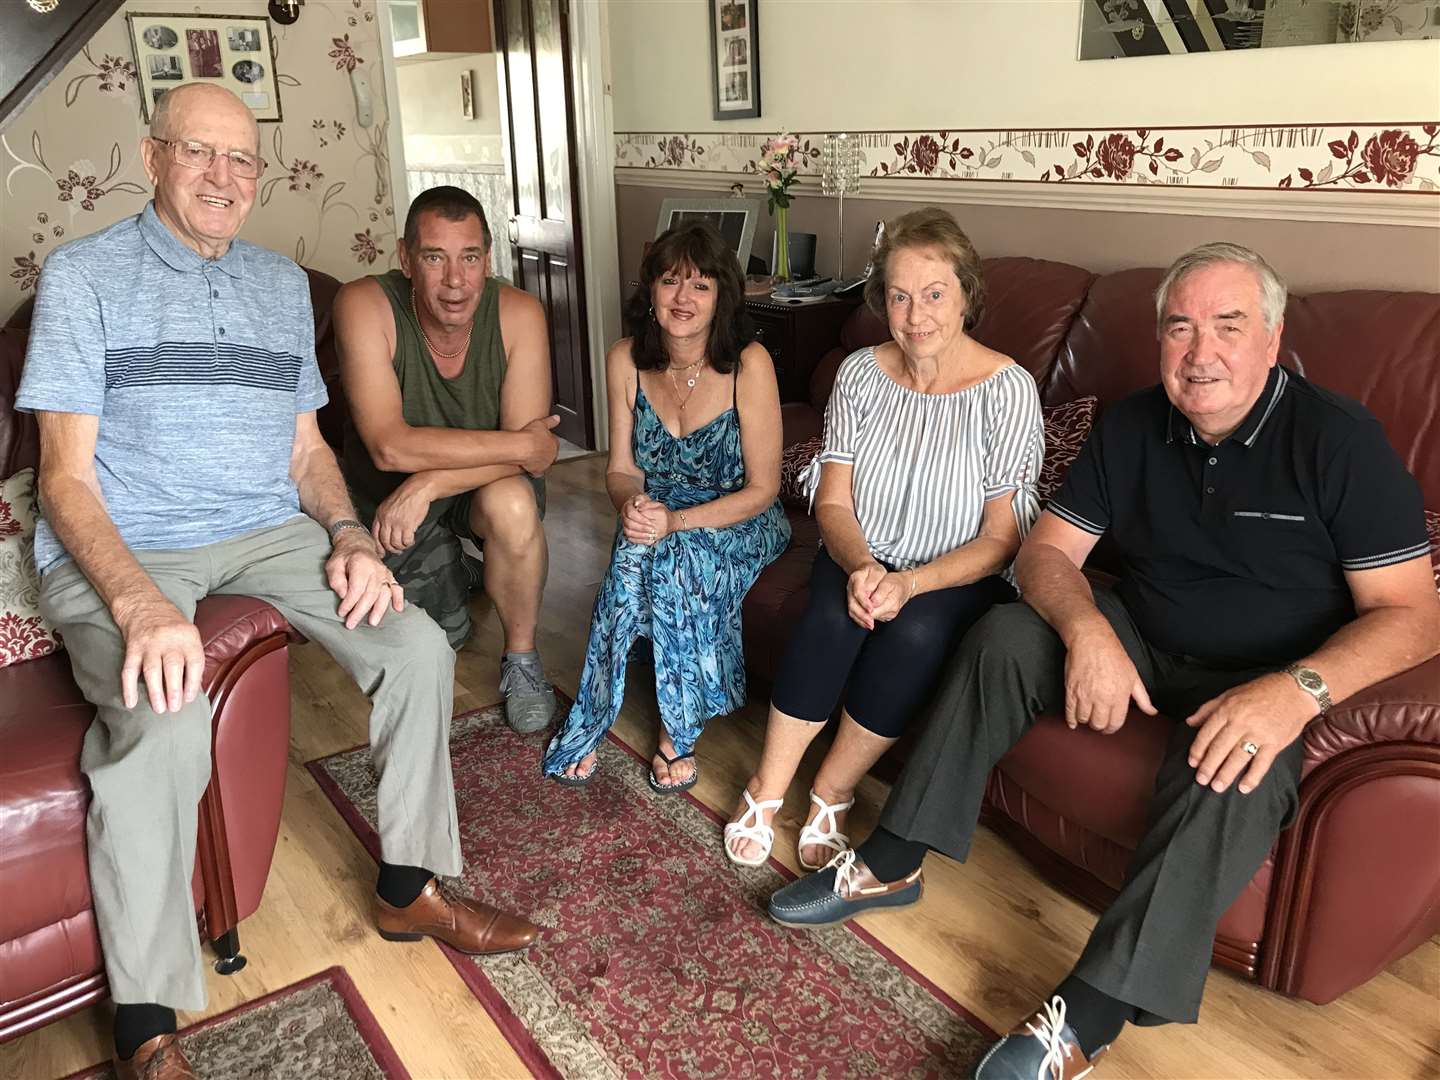 Keith Shrubsall with daughter Tina Smith, her partner Nigel Jones (middle) and Janice and Richard Shrubsall (right)